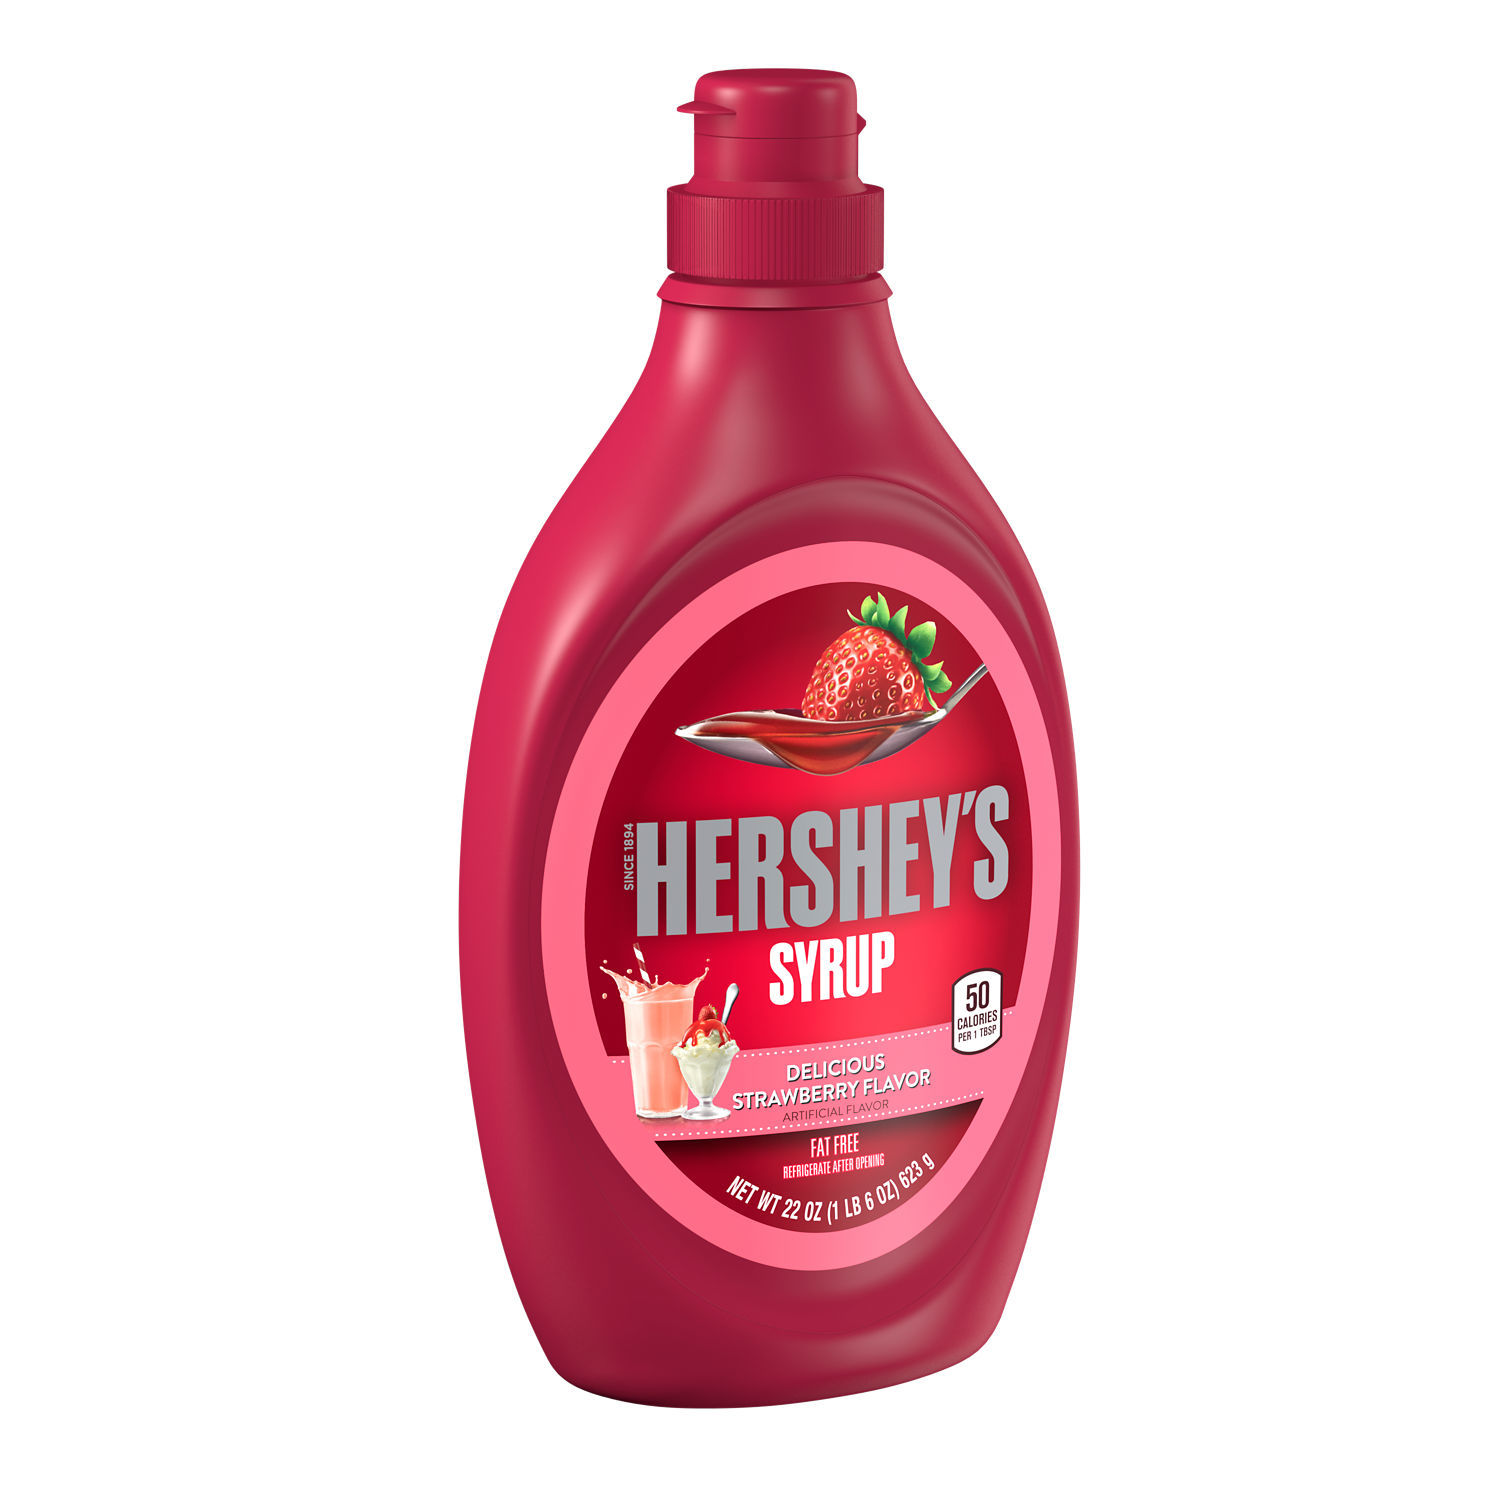 Hershey's Strawberry Flavored Syrup, Bottle 22 oz - image 1 of 5